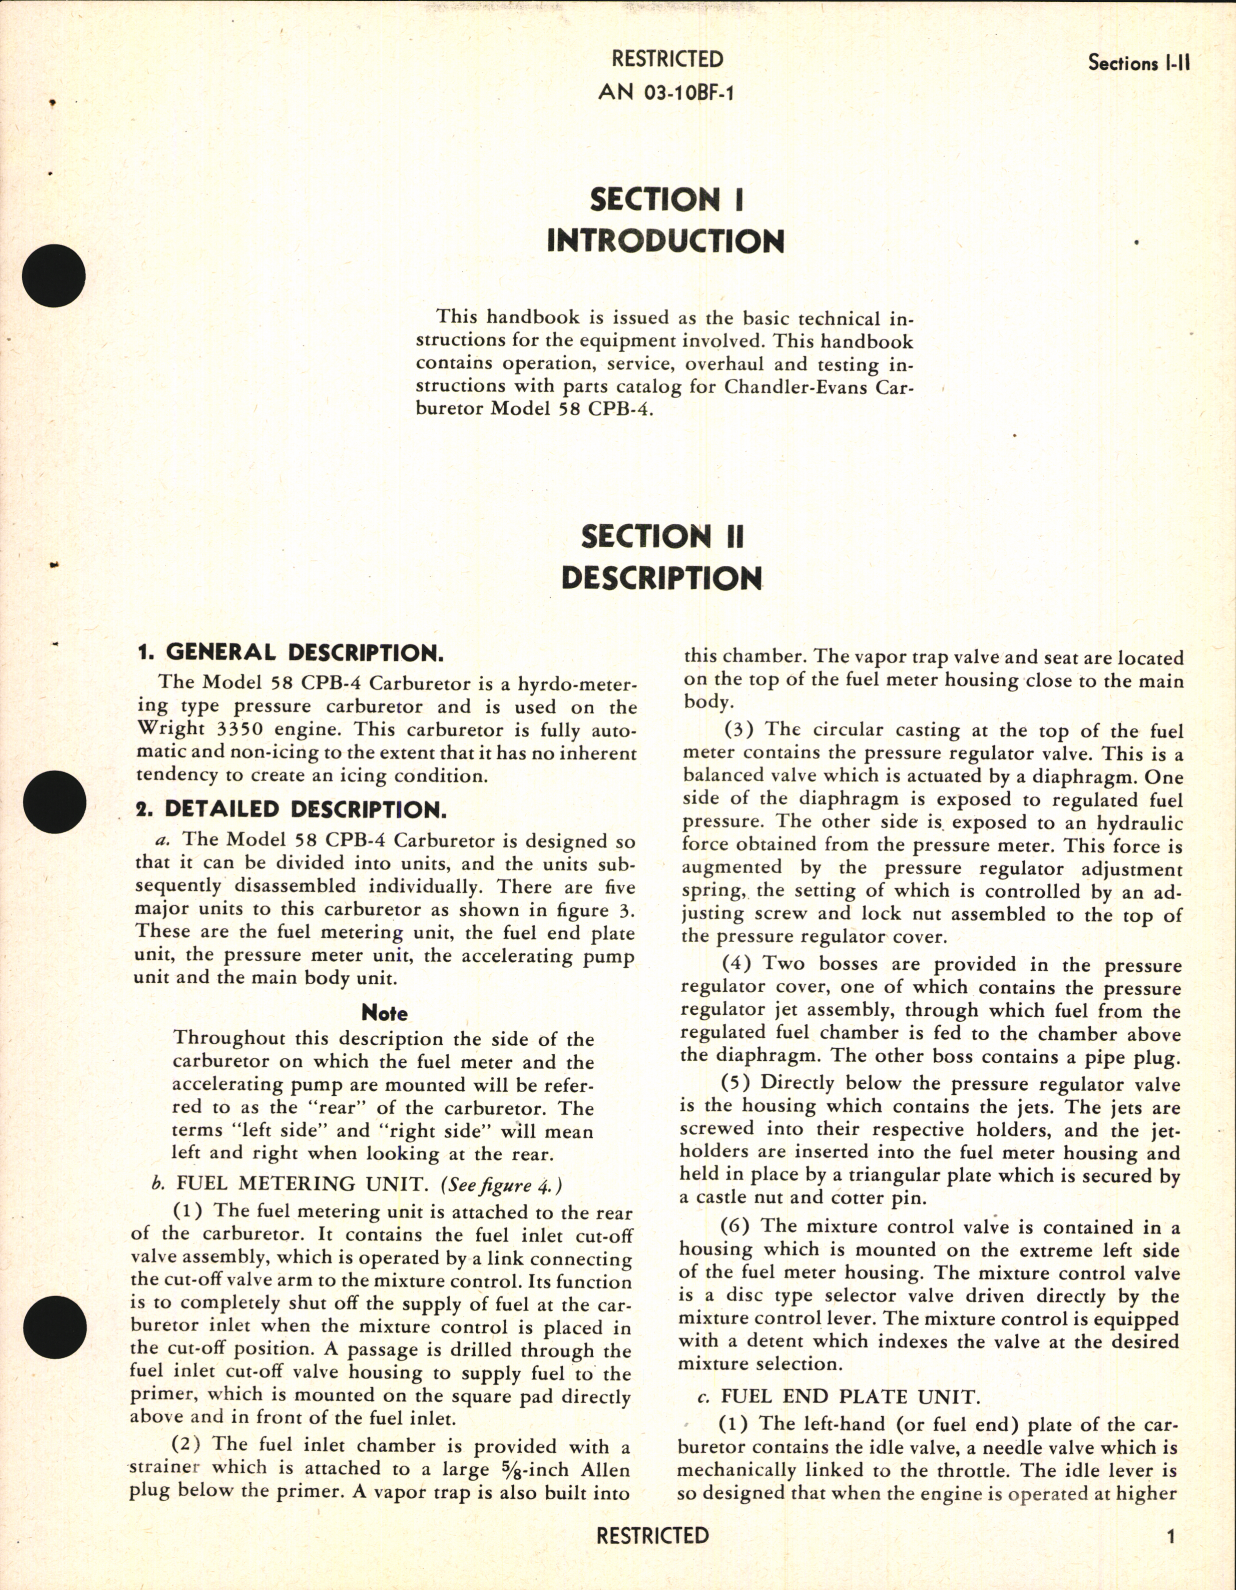 Sample page 7 from AirCorps Library document: Handbook of Instructions with Parts Catalog for Hydro-Metering Carburetor Model 58CPB-4